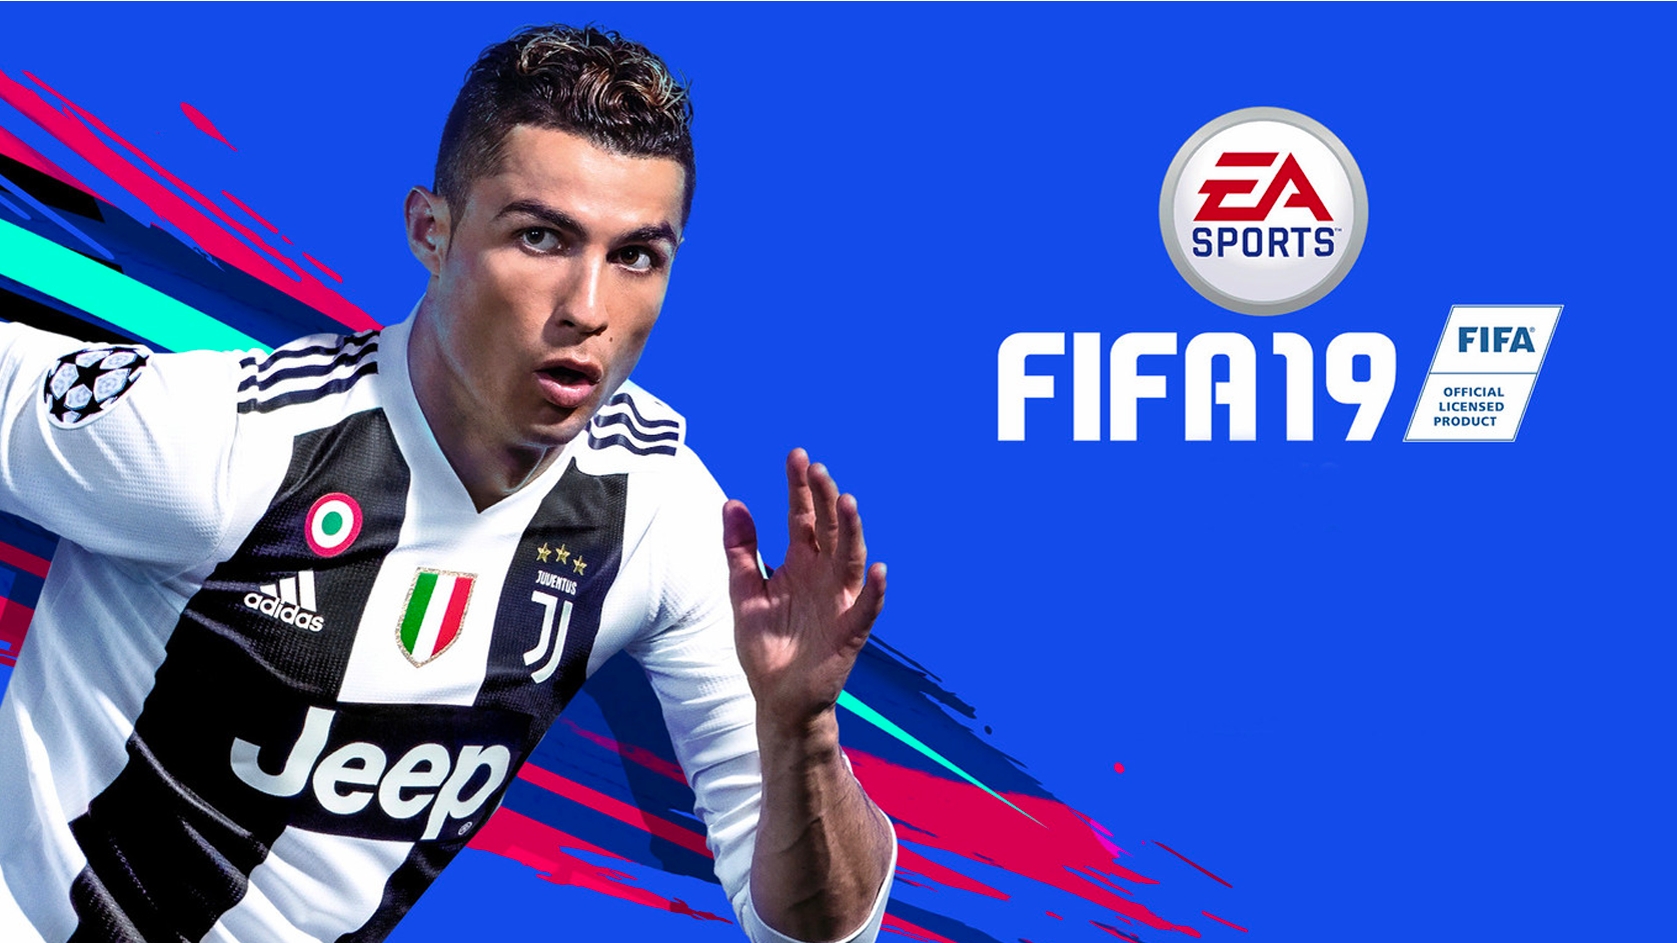 FIFA 19 PC Game Download For Free